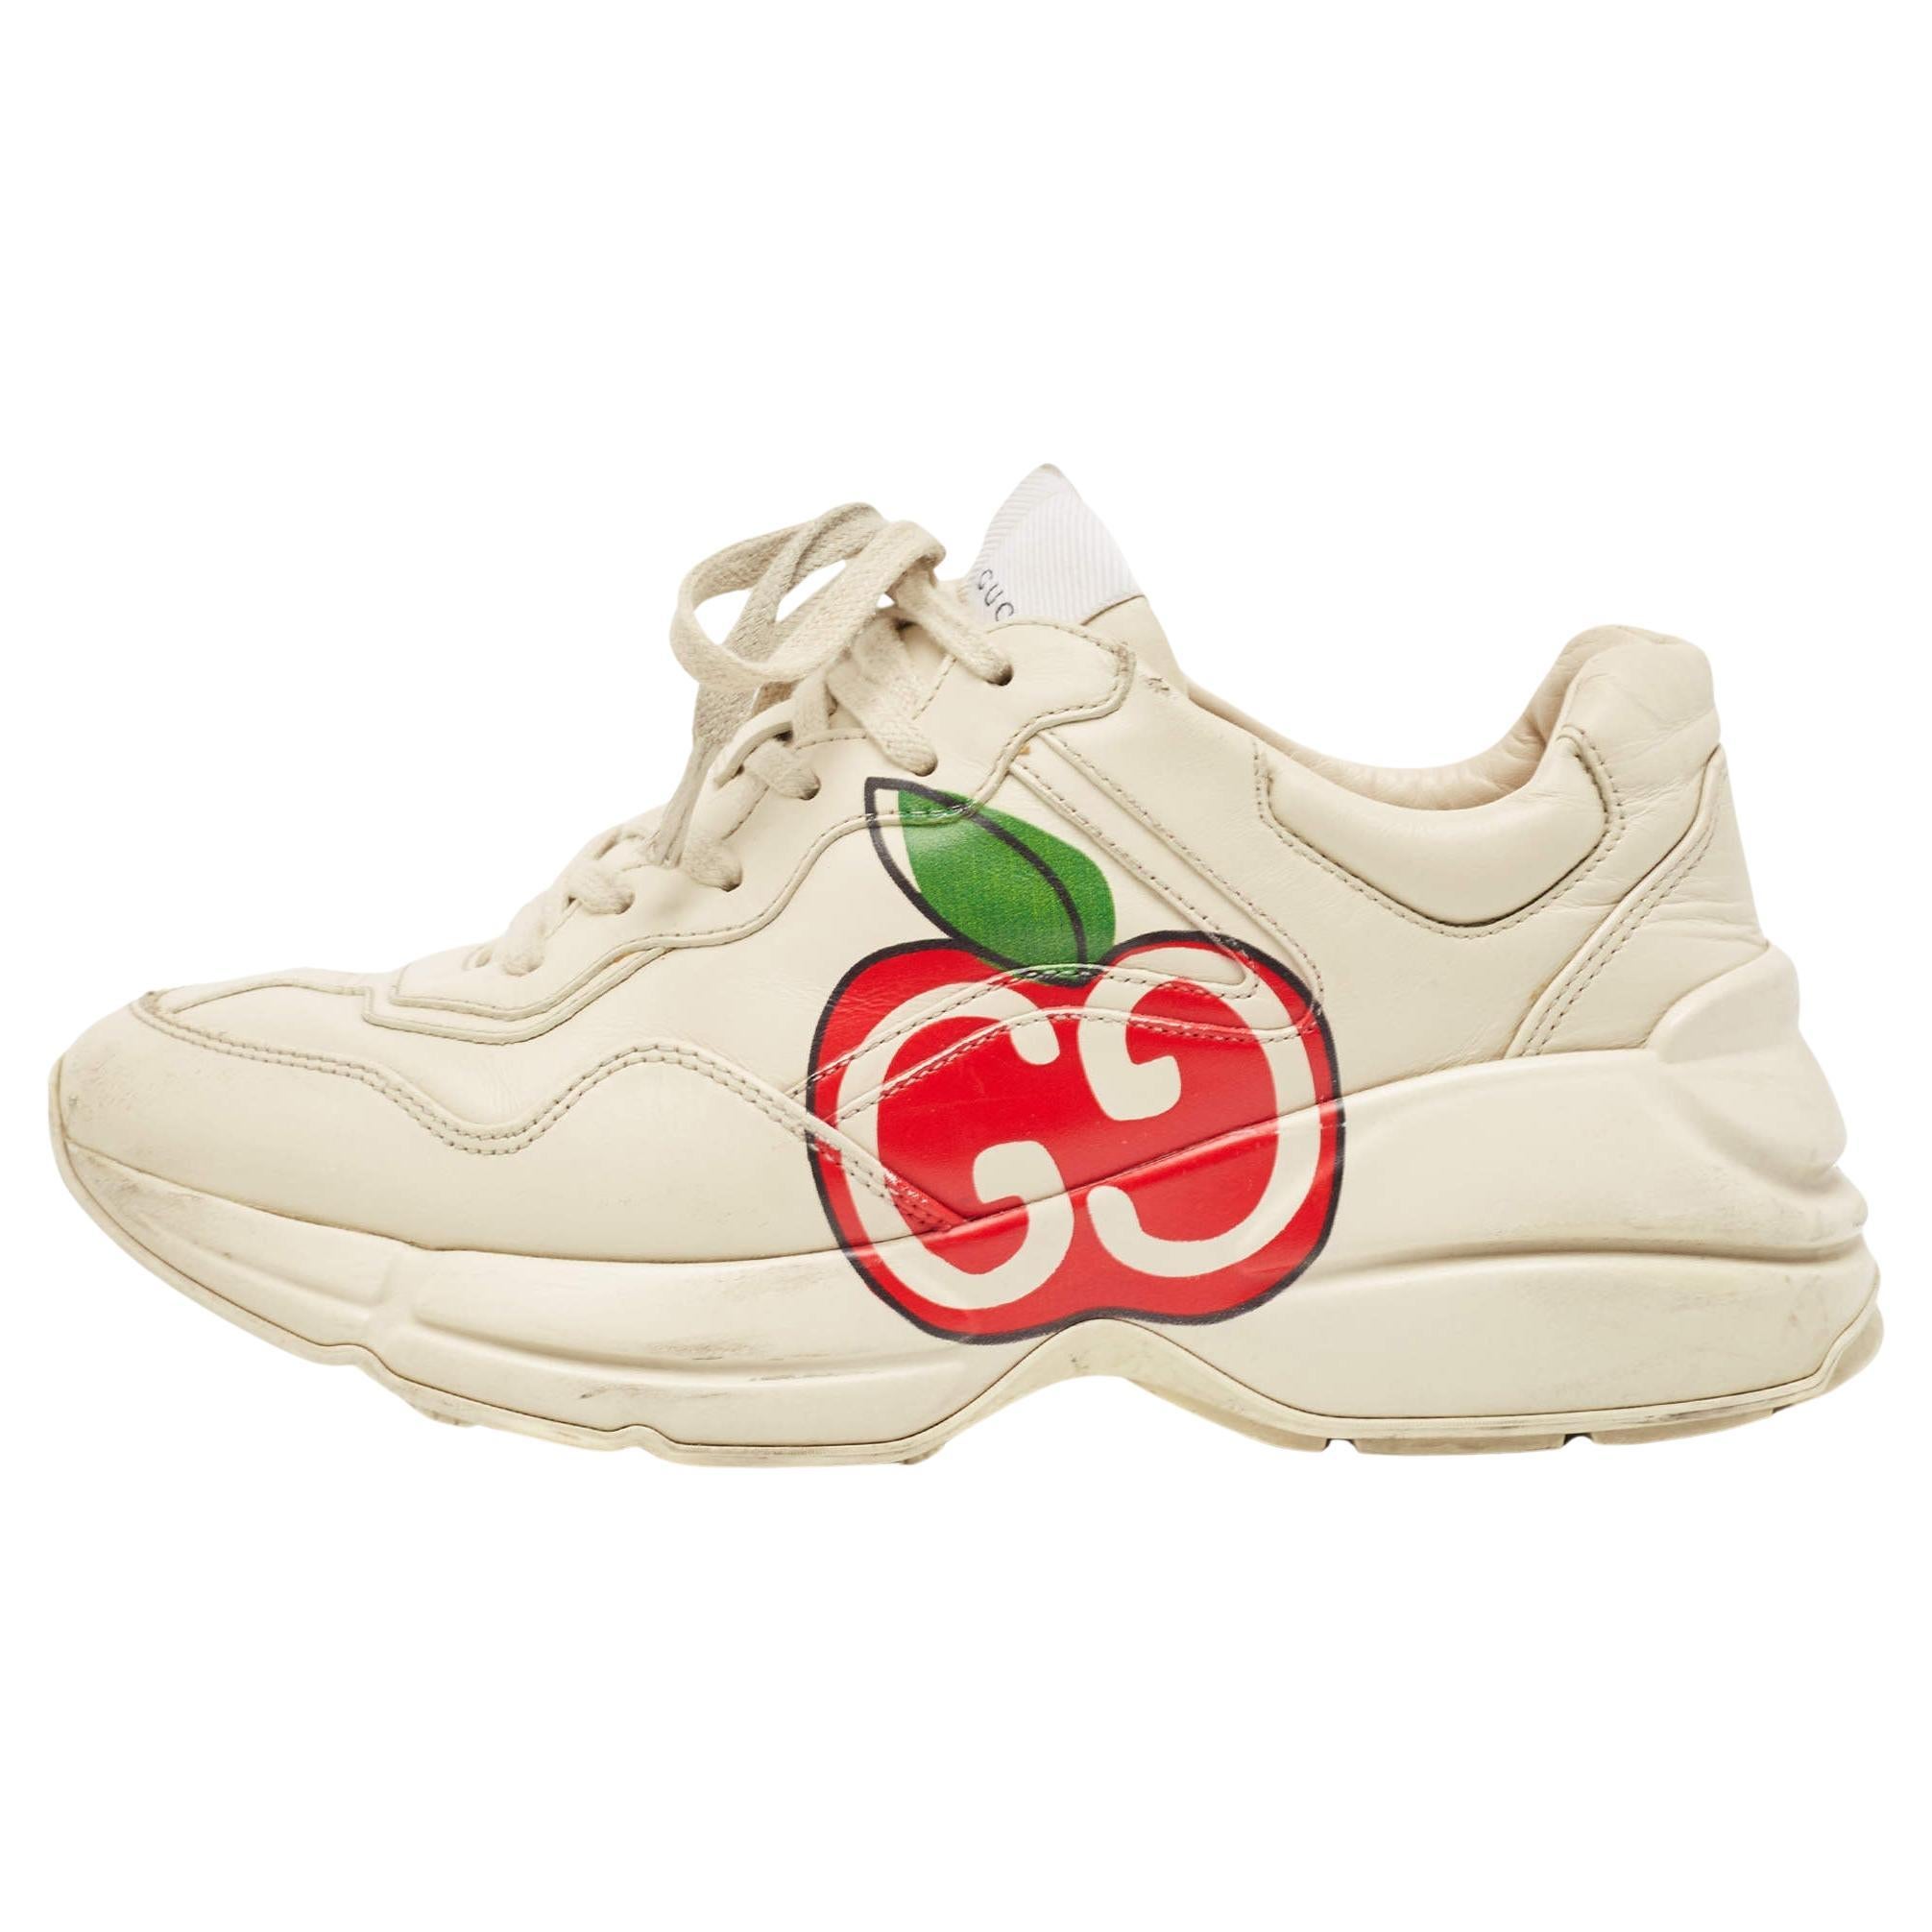 Gucci Cream Leather GG Apple Rhyton Sneakers Size 39 For Sale